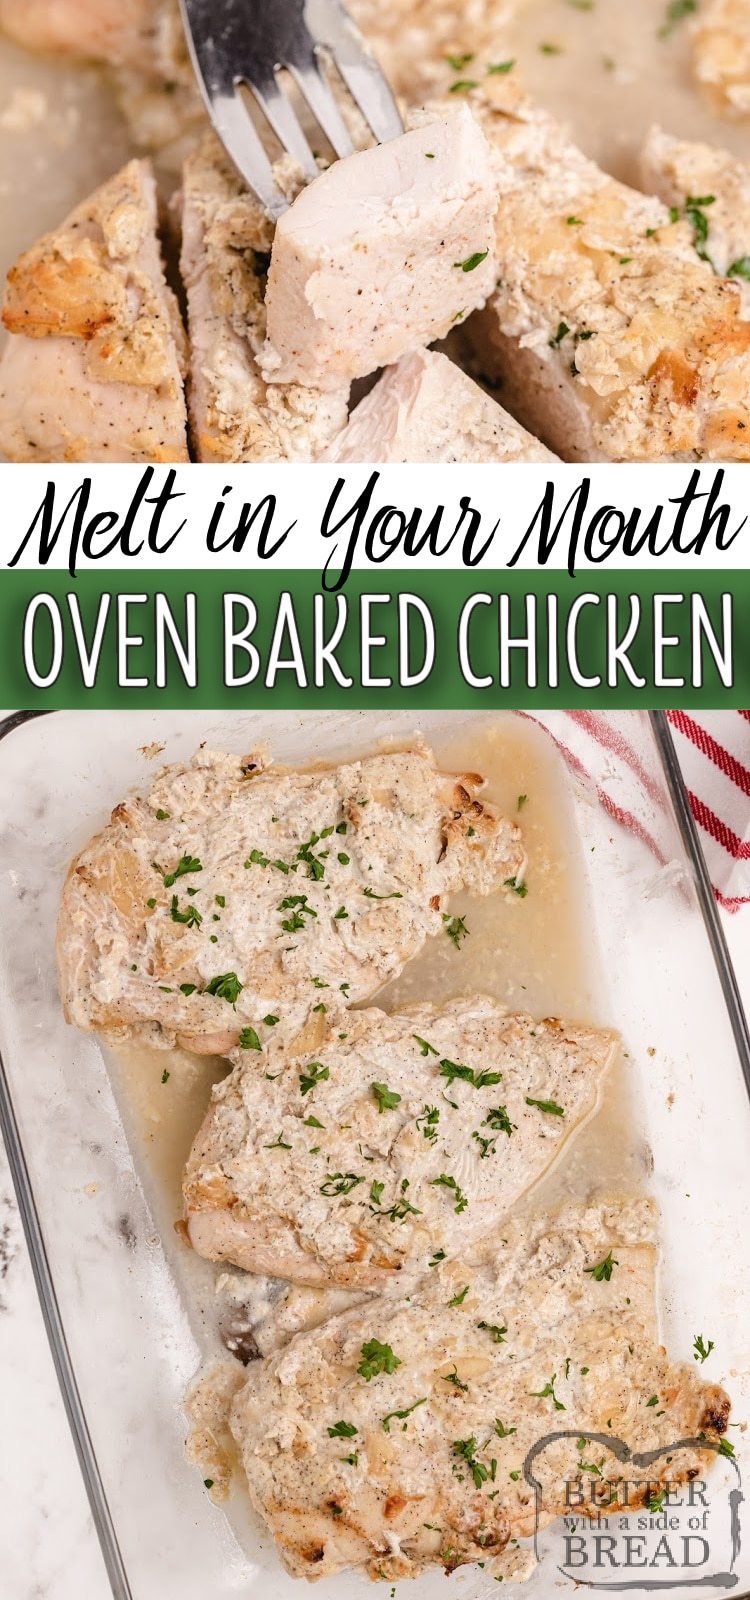 Oven Baked Chicken Breasts coated in Greek yogurt, Parmesan cheese and seasonings for a delicious baked chicken breast recipe that everyone loves! This chicken is juicy, flavorful, healthy and high in protein.